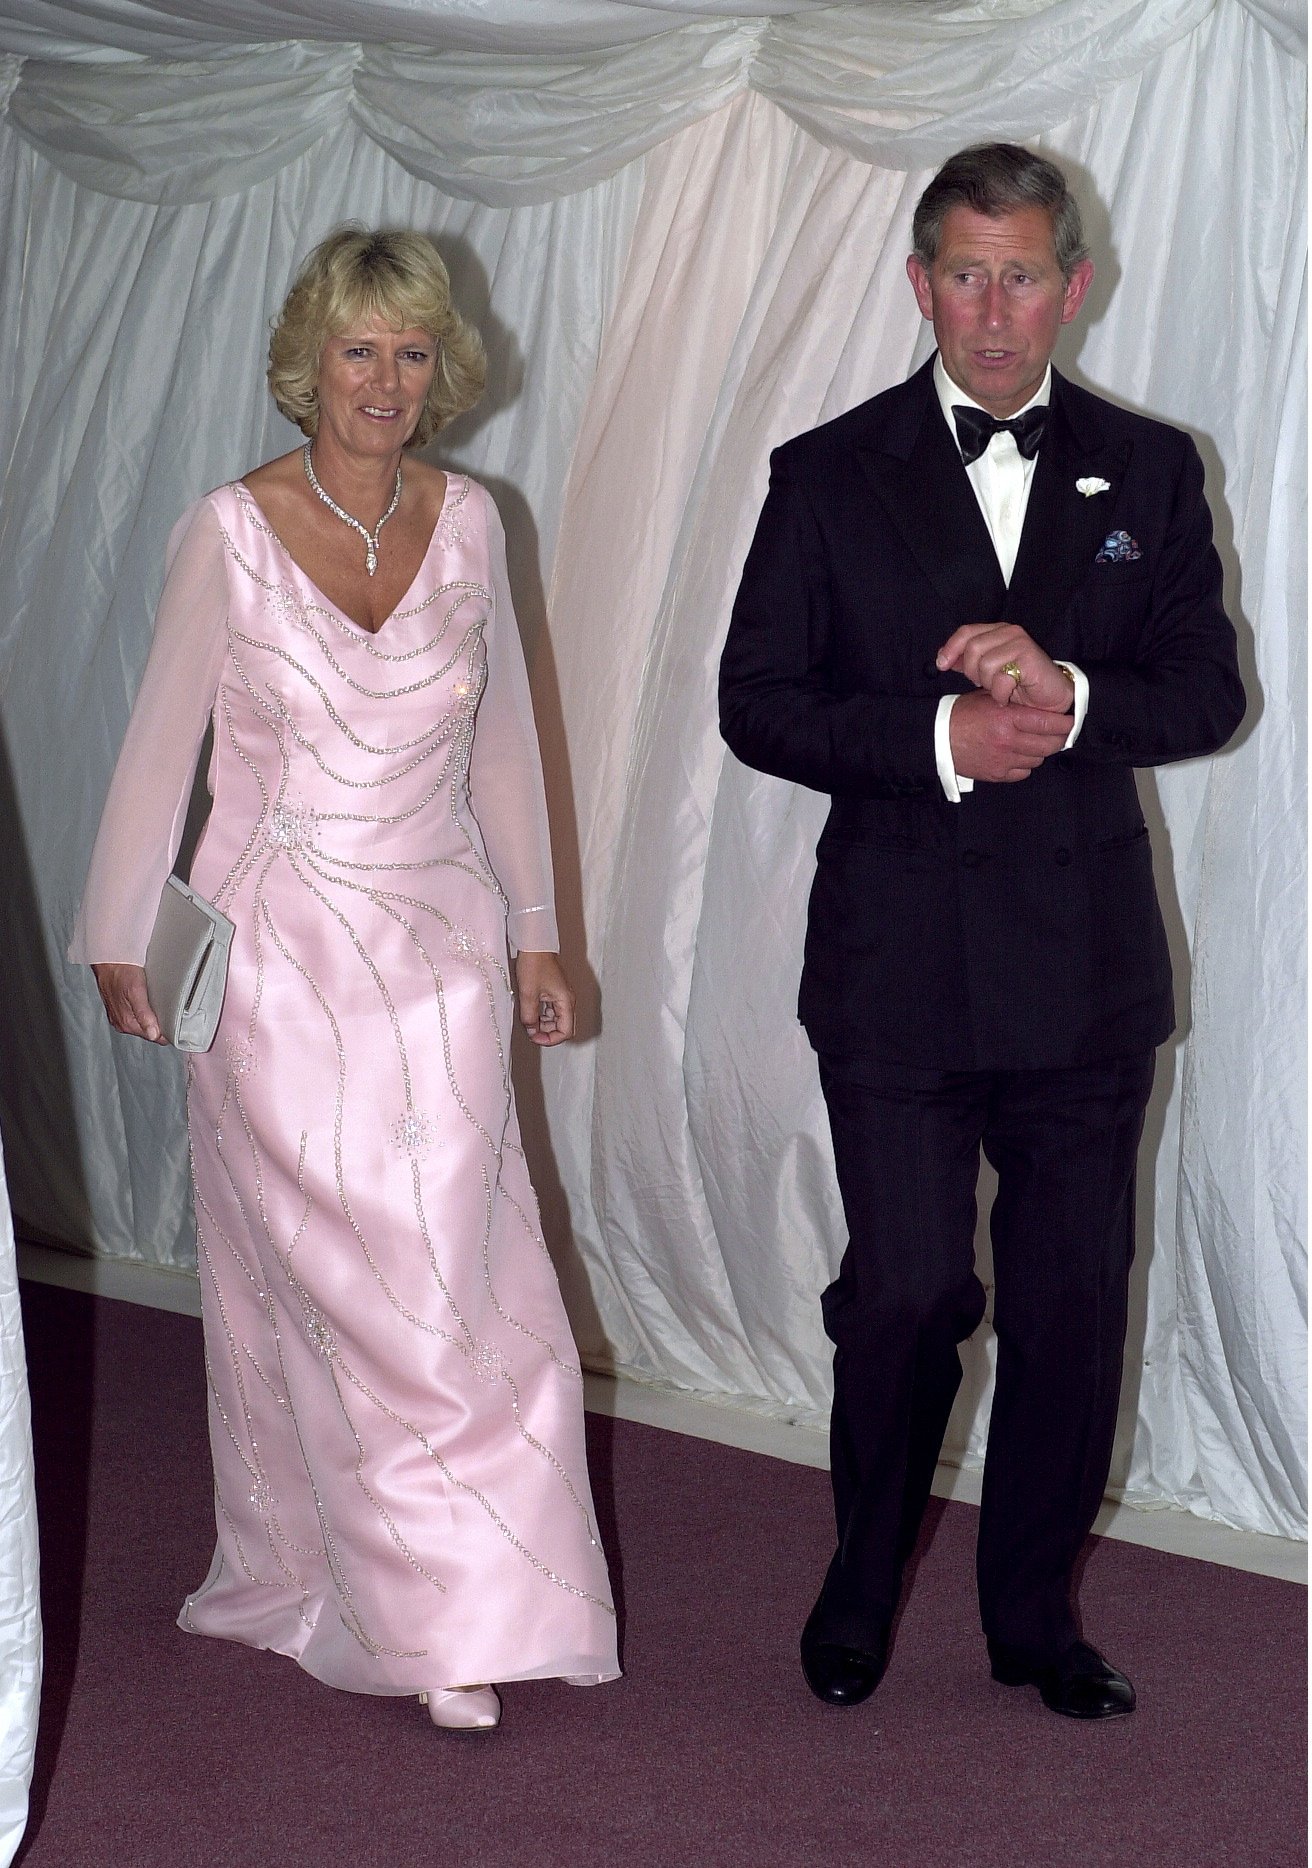 Prince Charles and Camilla Parker-Bowles during The Prince's Foundation Gala Dinner in London. | Source: Getty Images